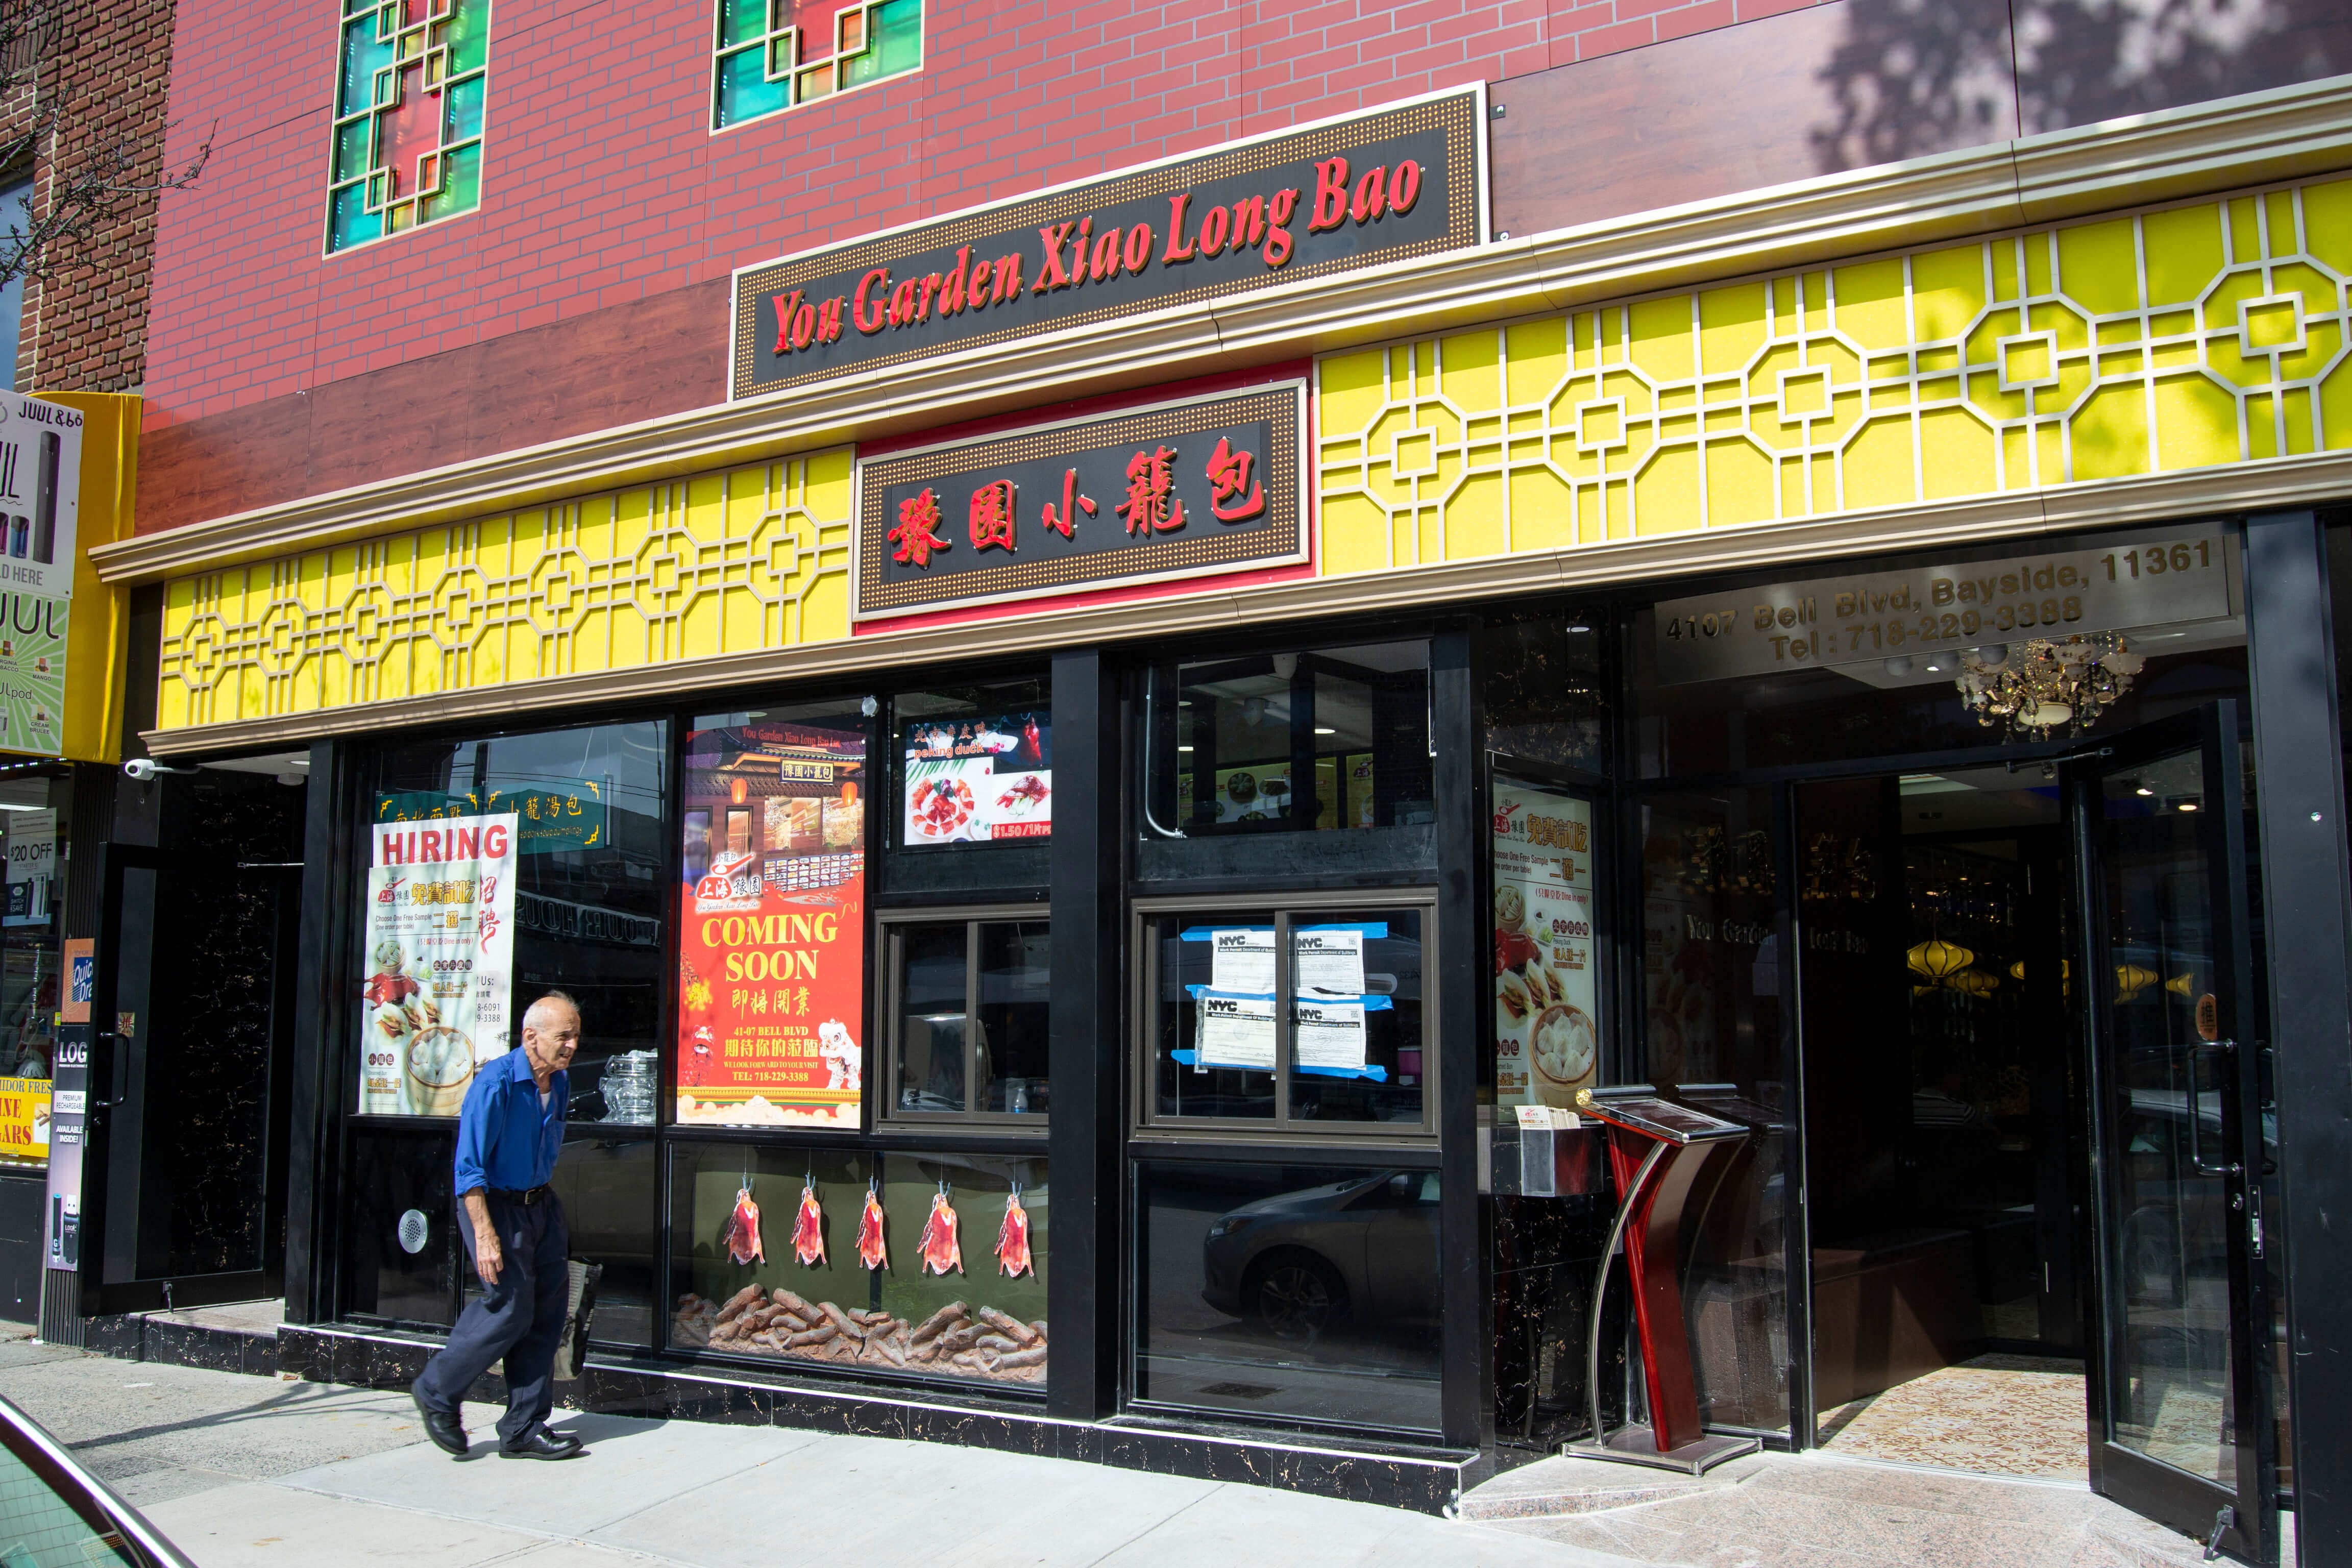 Guide To Queens Here Are 6 Places To Find The Best Asian Food In The World S Borough Qns Com